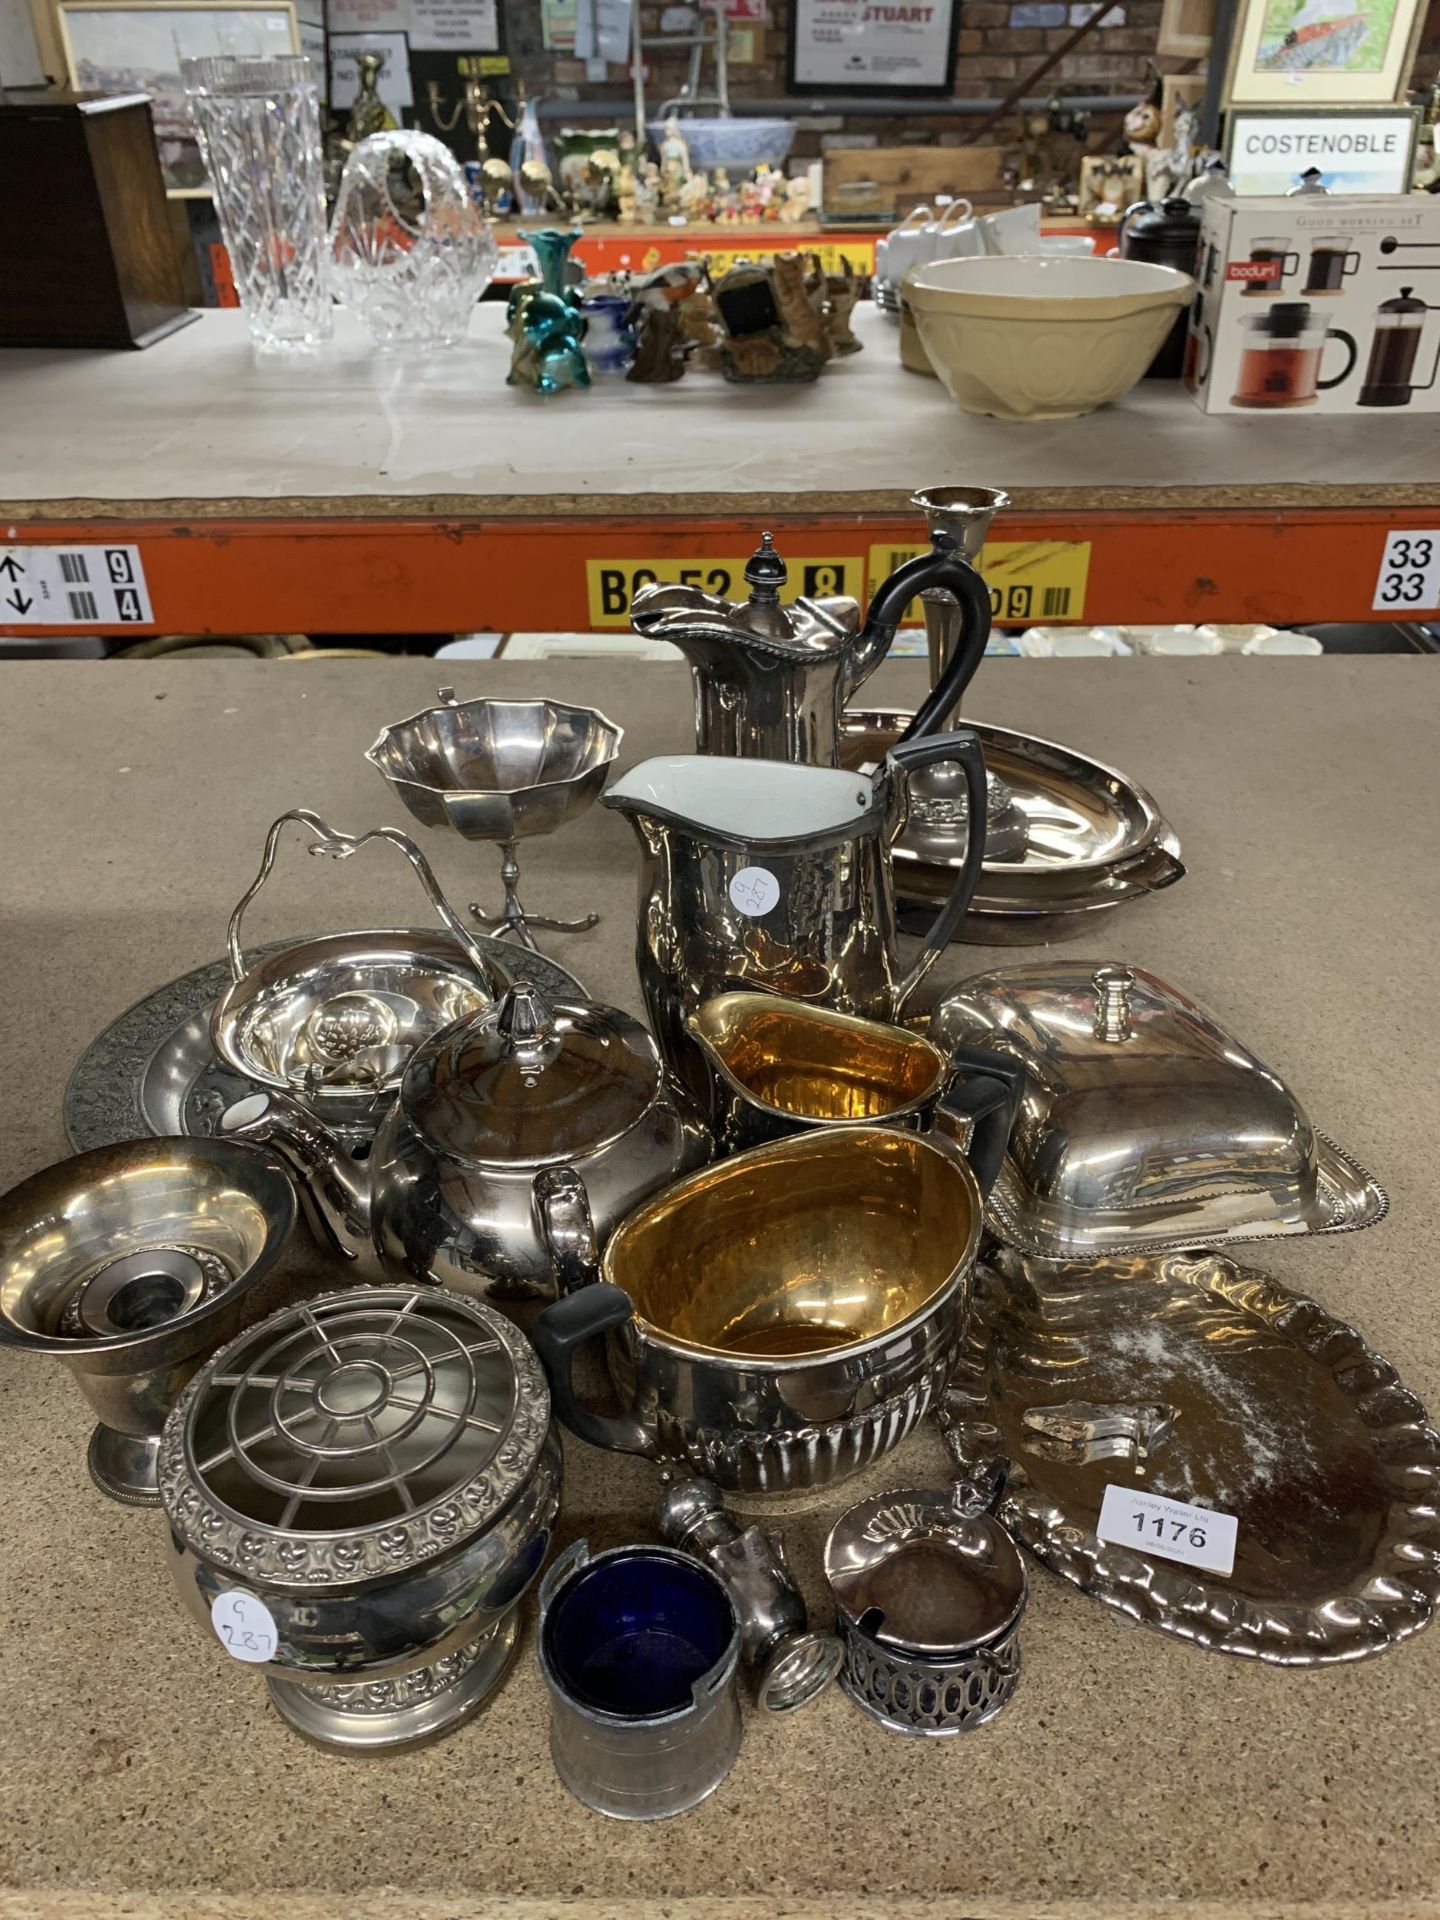 A LARGE MIXED LOT OF SILVER PLATE TO INCLUDE A CANDLE STICK, BUTTER DISH, ROSE BOWL, CAKE PLATE ETC,